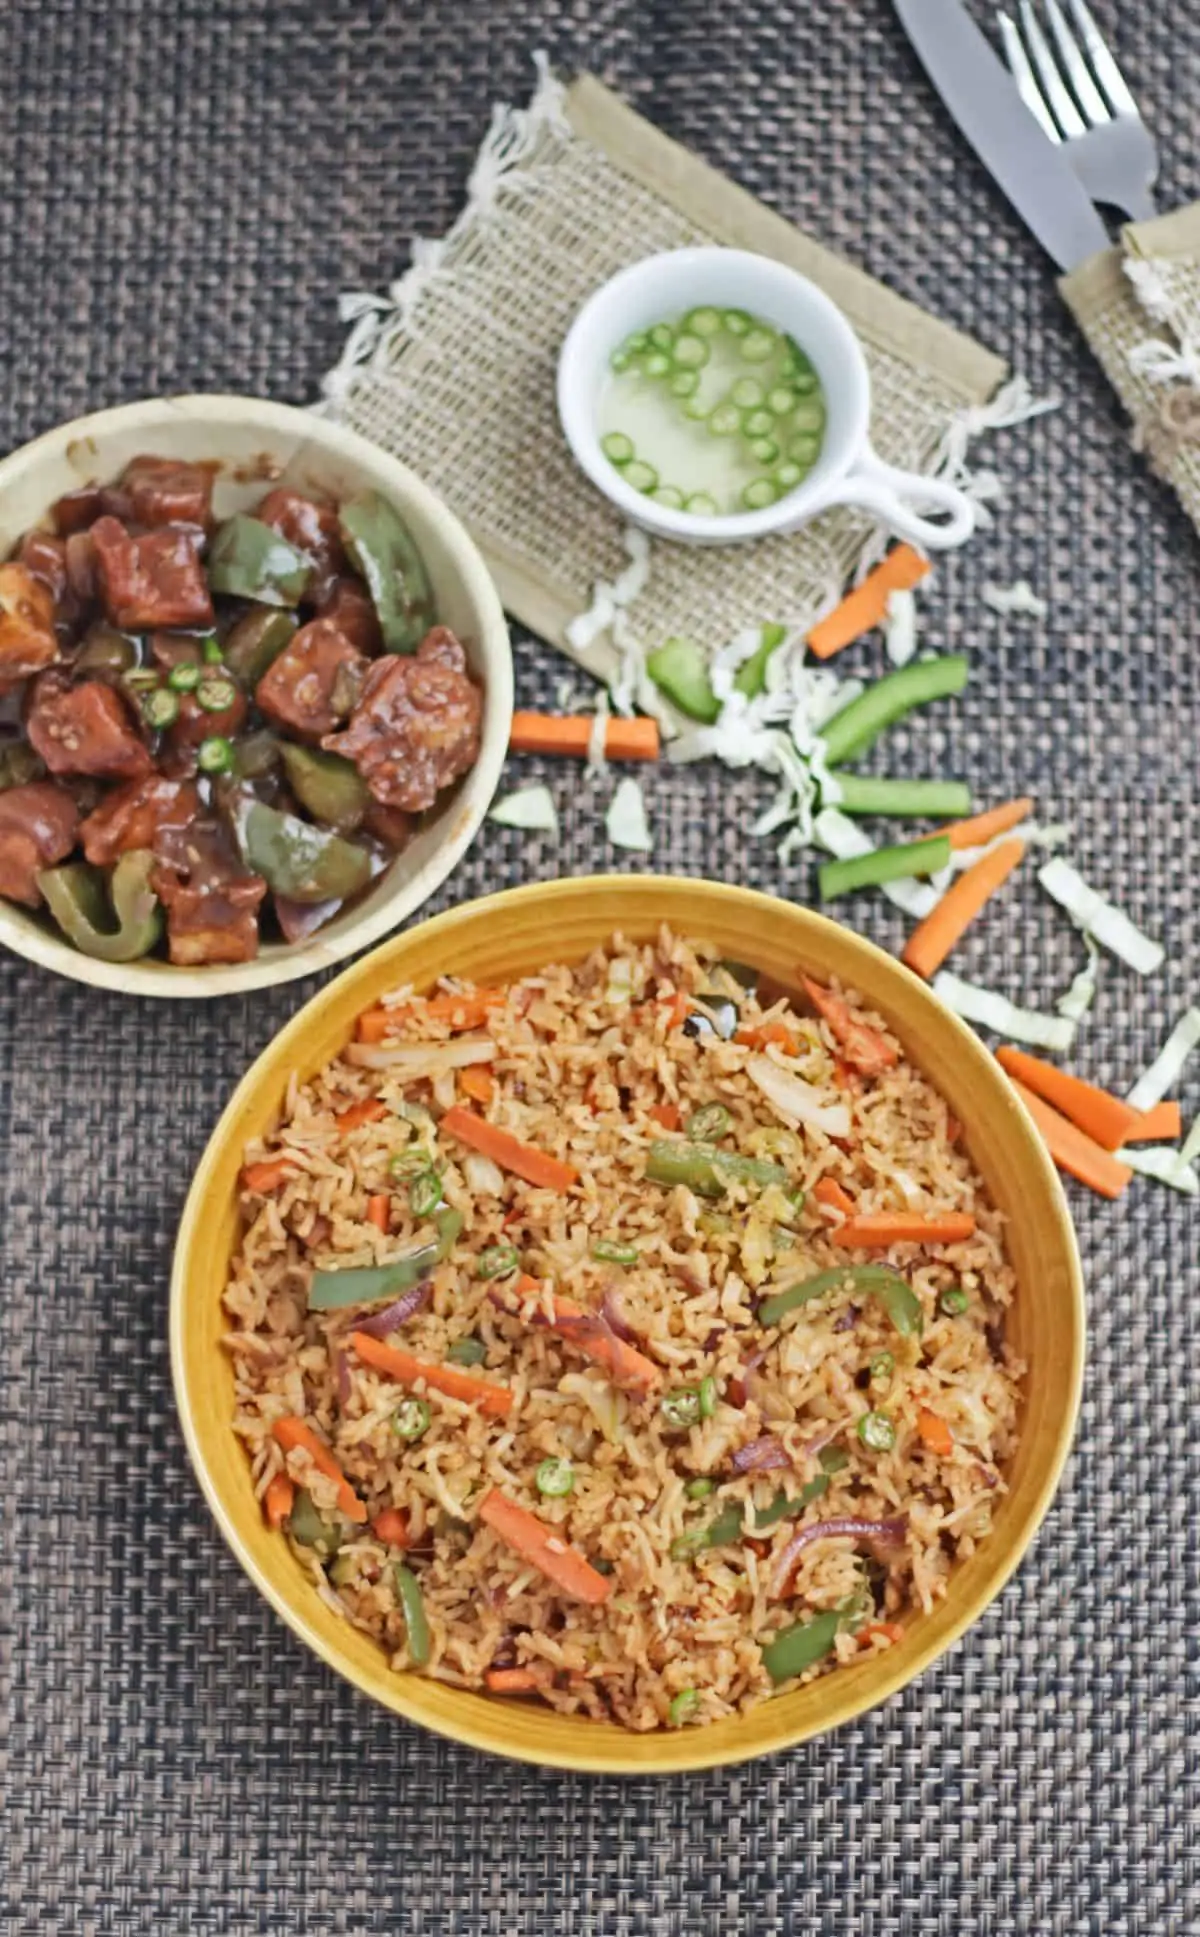 Fried rice with mixed vegetables and fried tofu and vegetables in the background